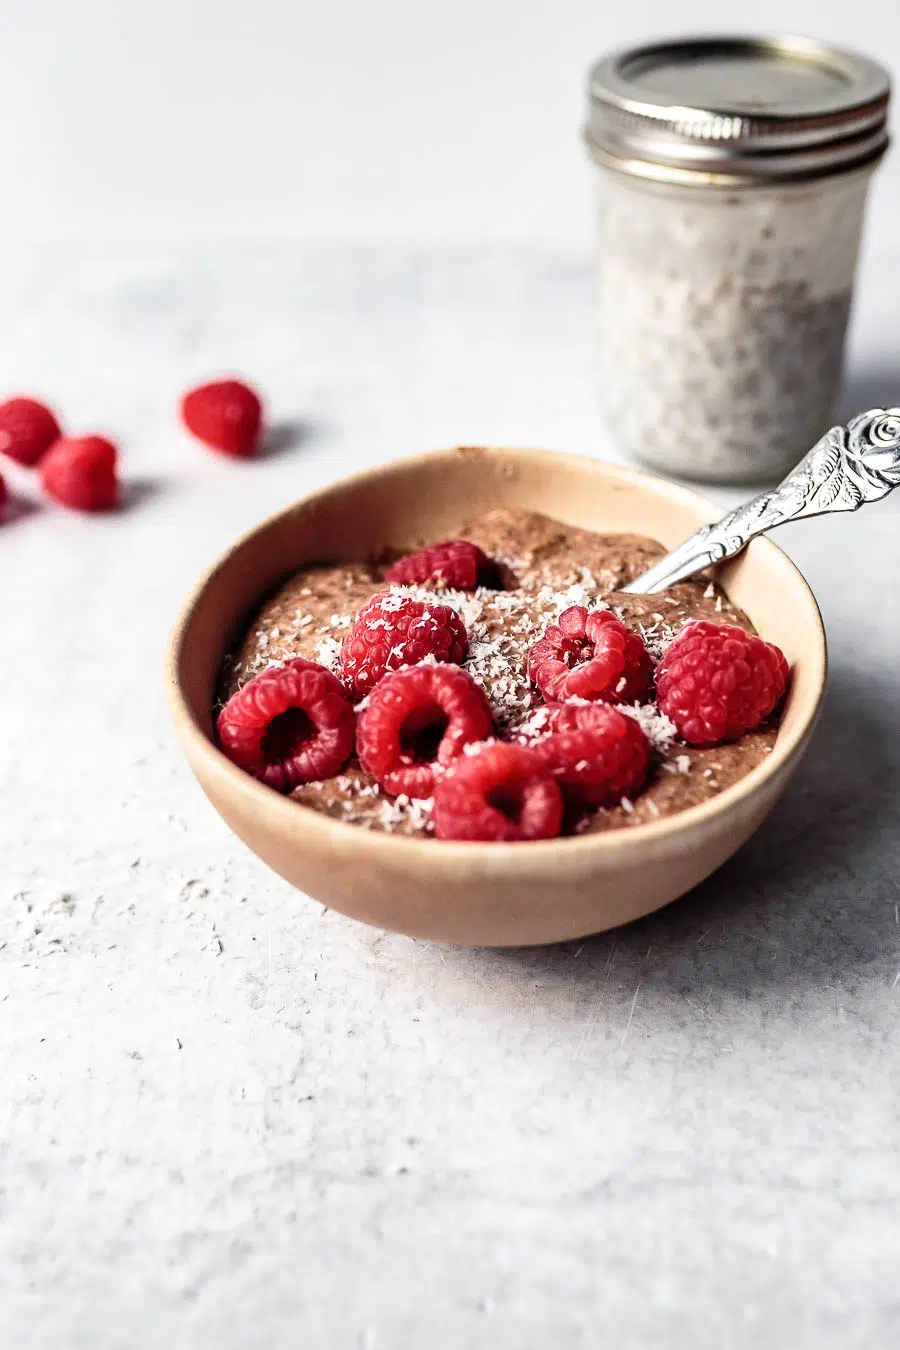 Blended chia pudding in a clay bowl on a white counter top. The pudding is topped with raspberries and desiccated coconut. There is a silver spoon sitting inside the bowl and a few scattered raspberries and a jar of soaking chia seeds on the counter top.